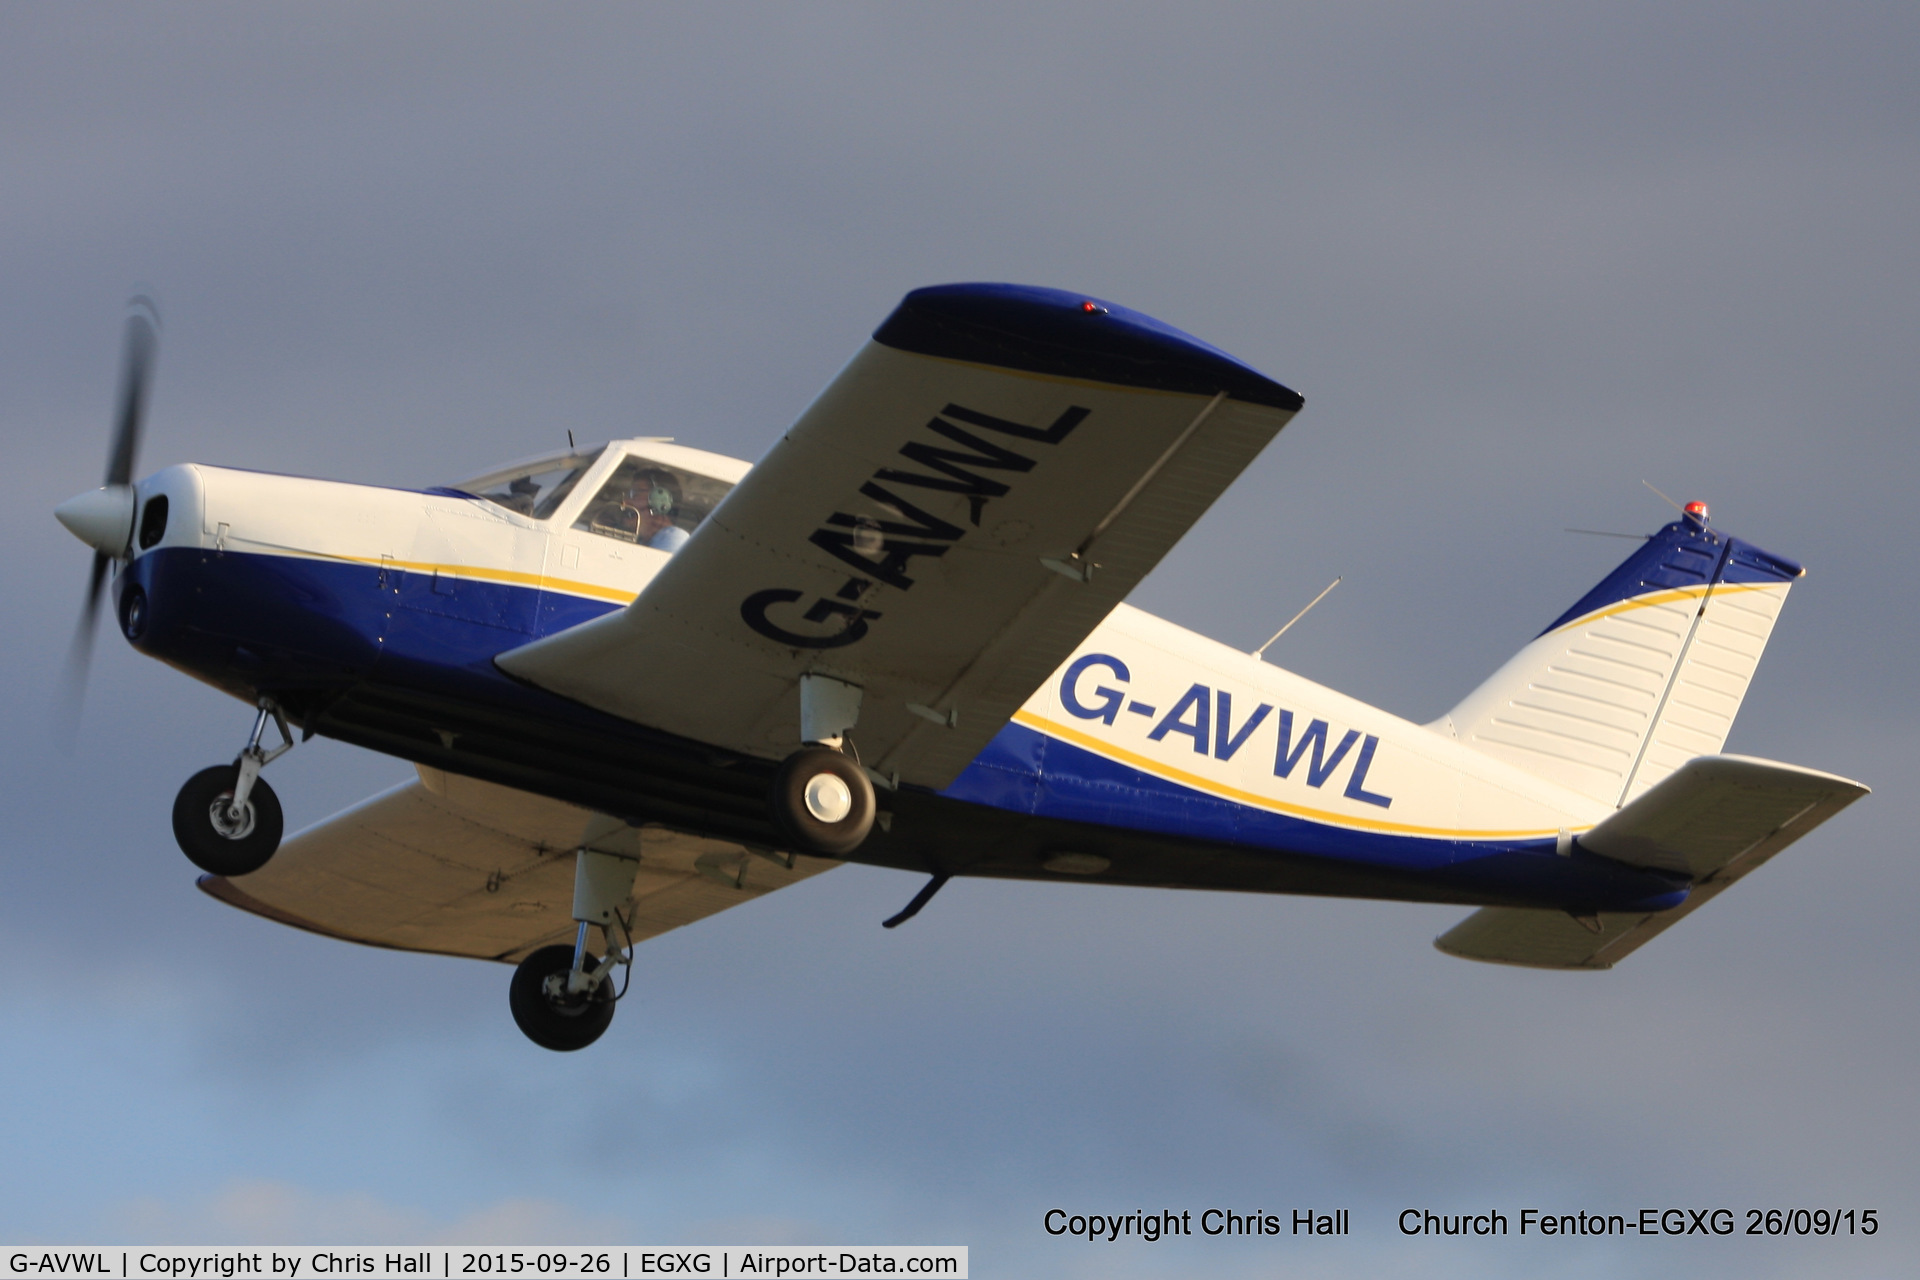 G-AVWL, 1967 Piper PA-28-140 Cherokee C/N 28-24000, at the Yorkshire Airshow